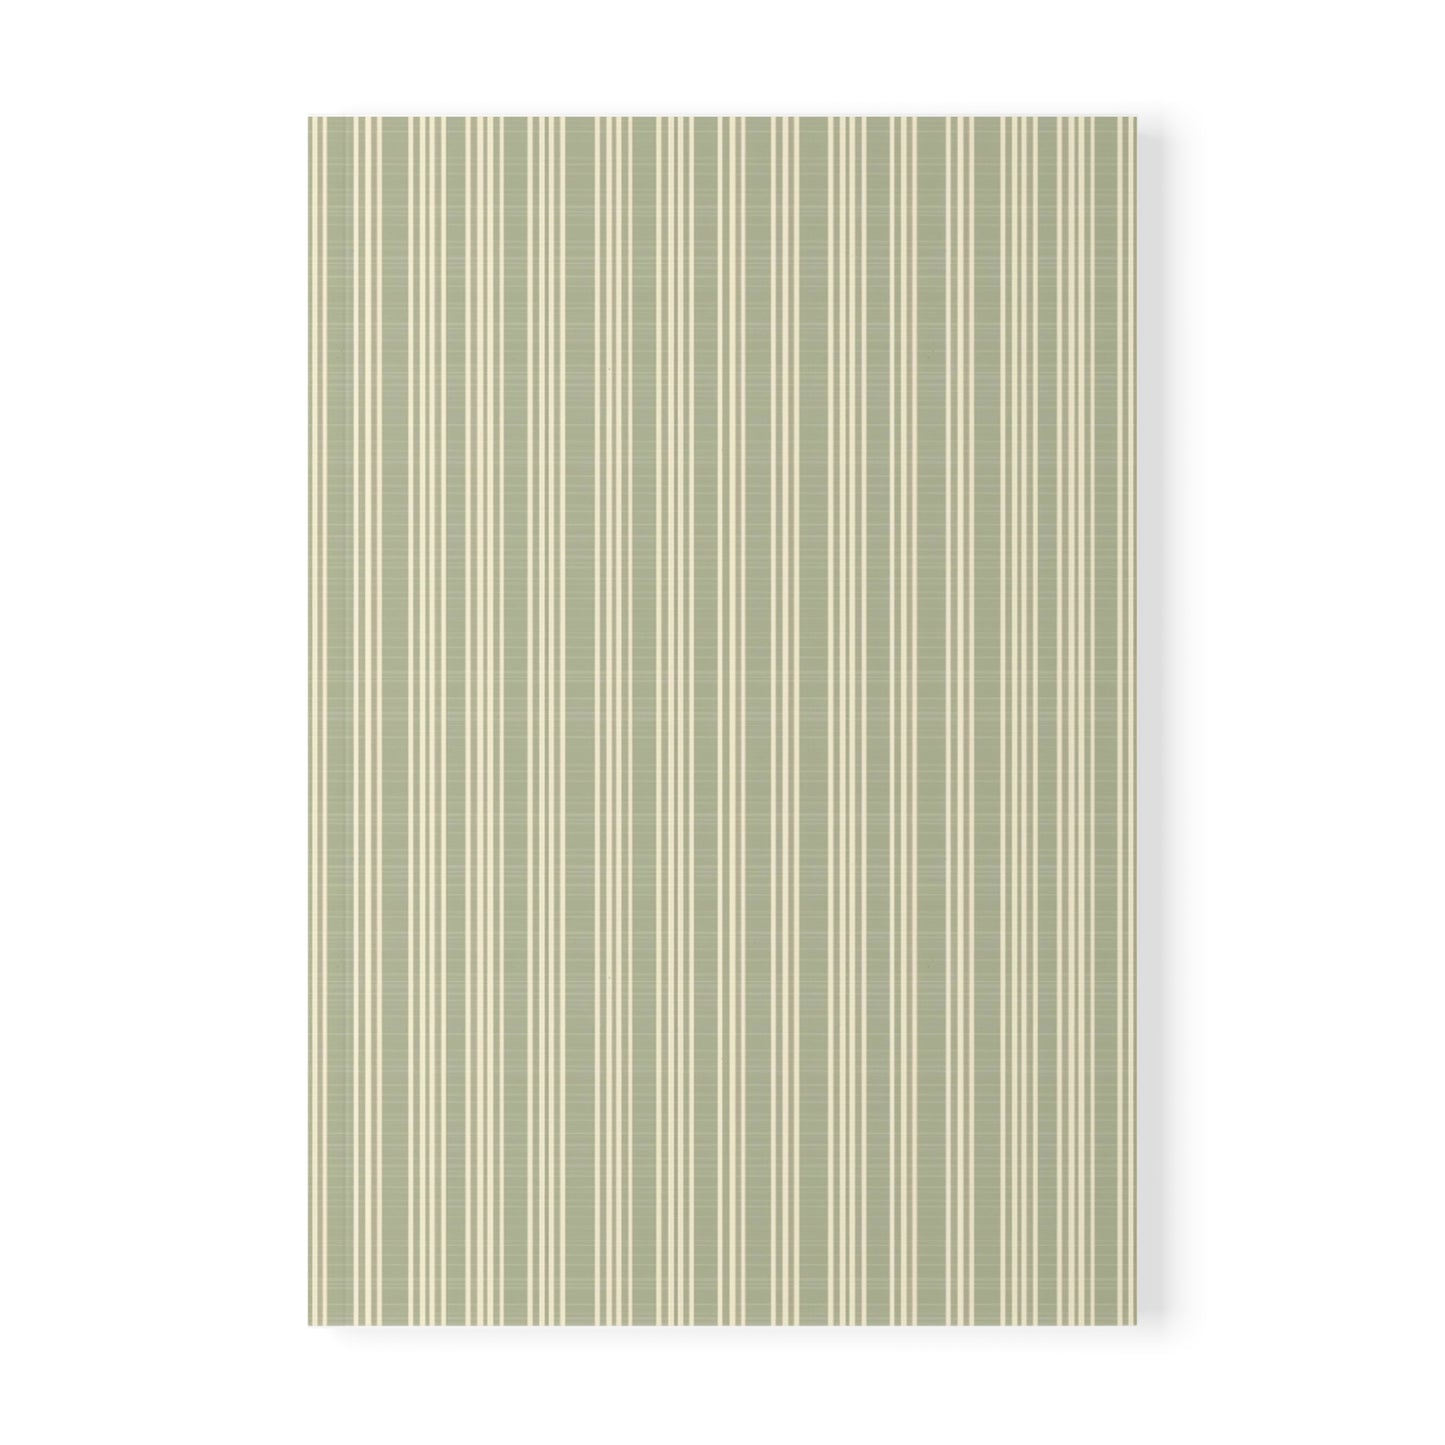 Vampire Art French Grandad Stripes in Khaki Softcover Notebook, A5